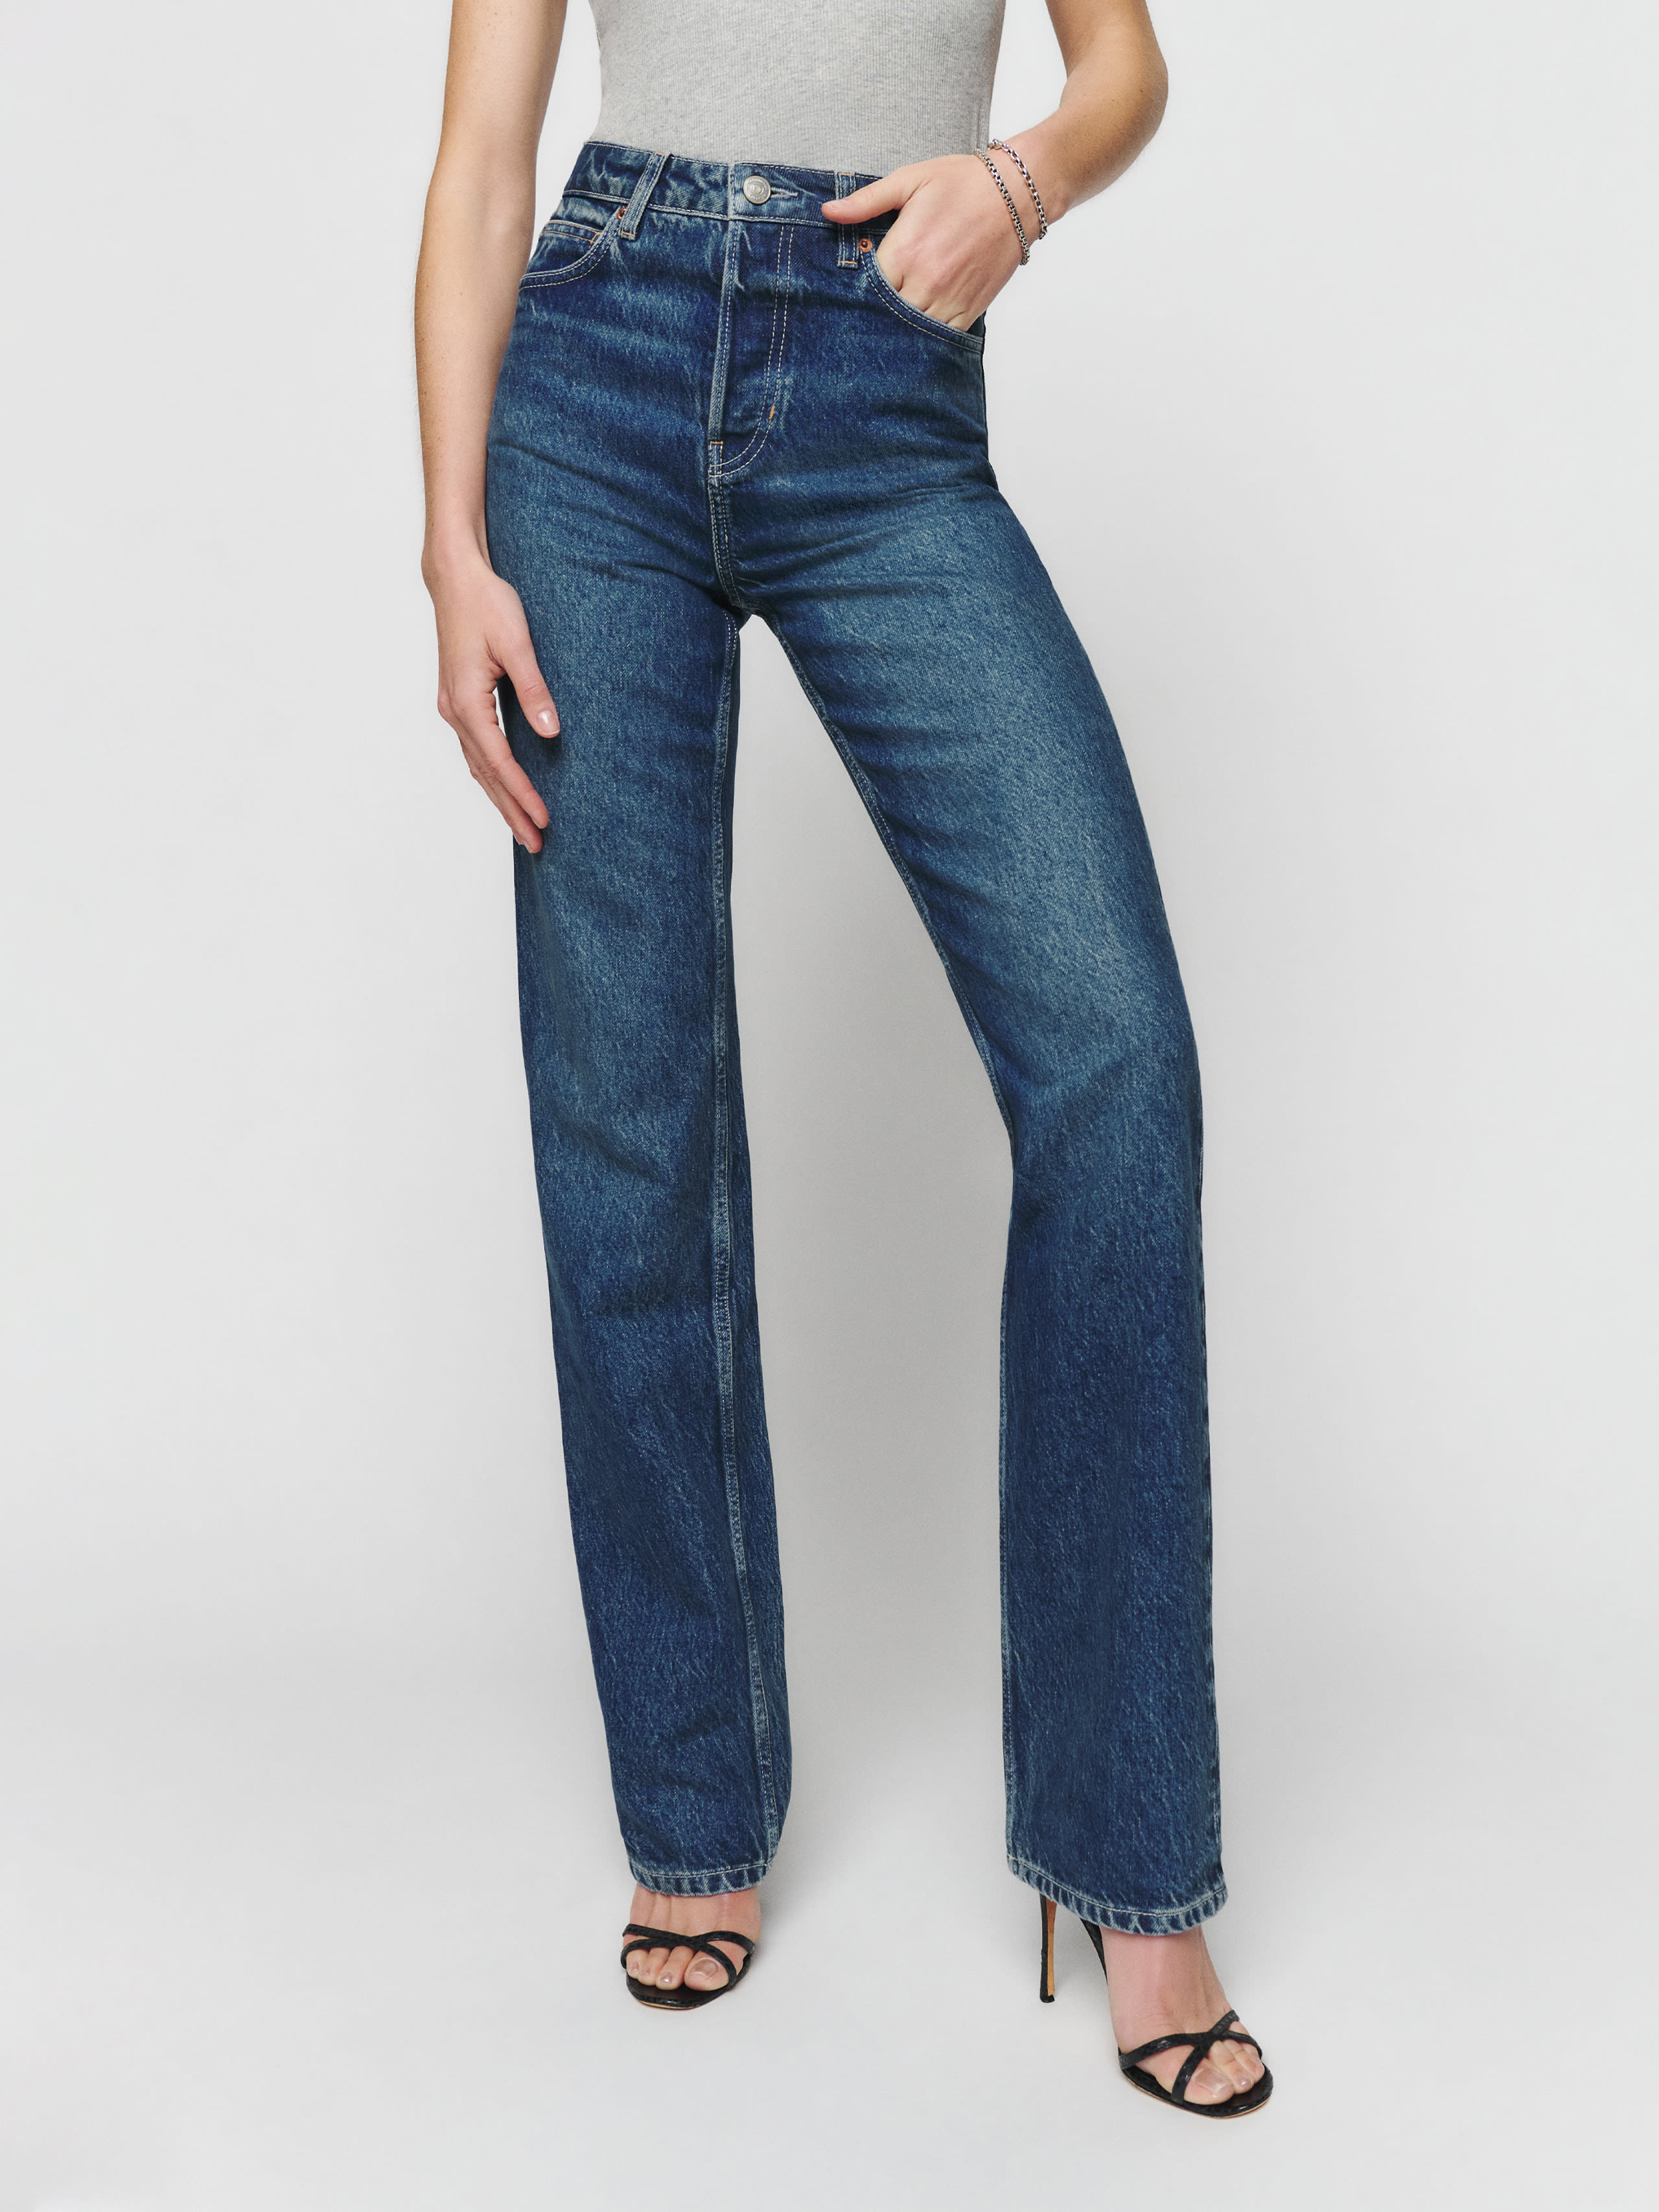 Reformation Cynthia High Rise Straight Long Jeans In Lanier